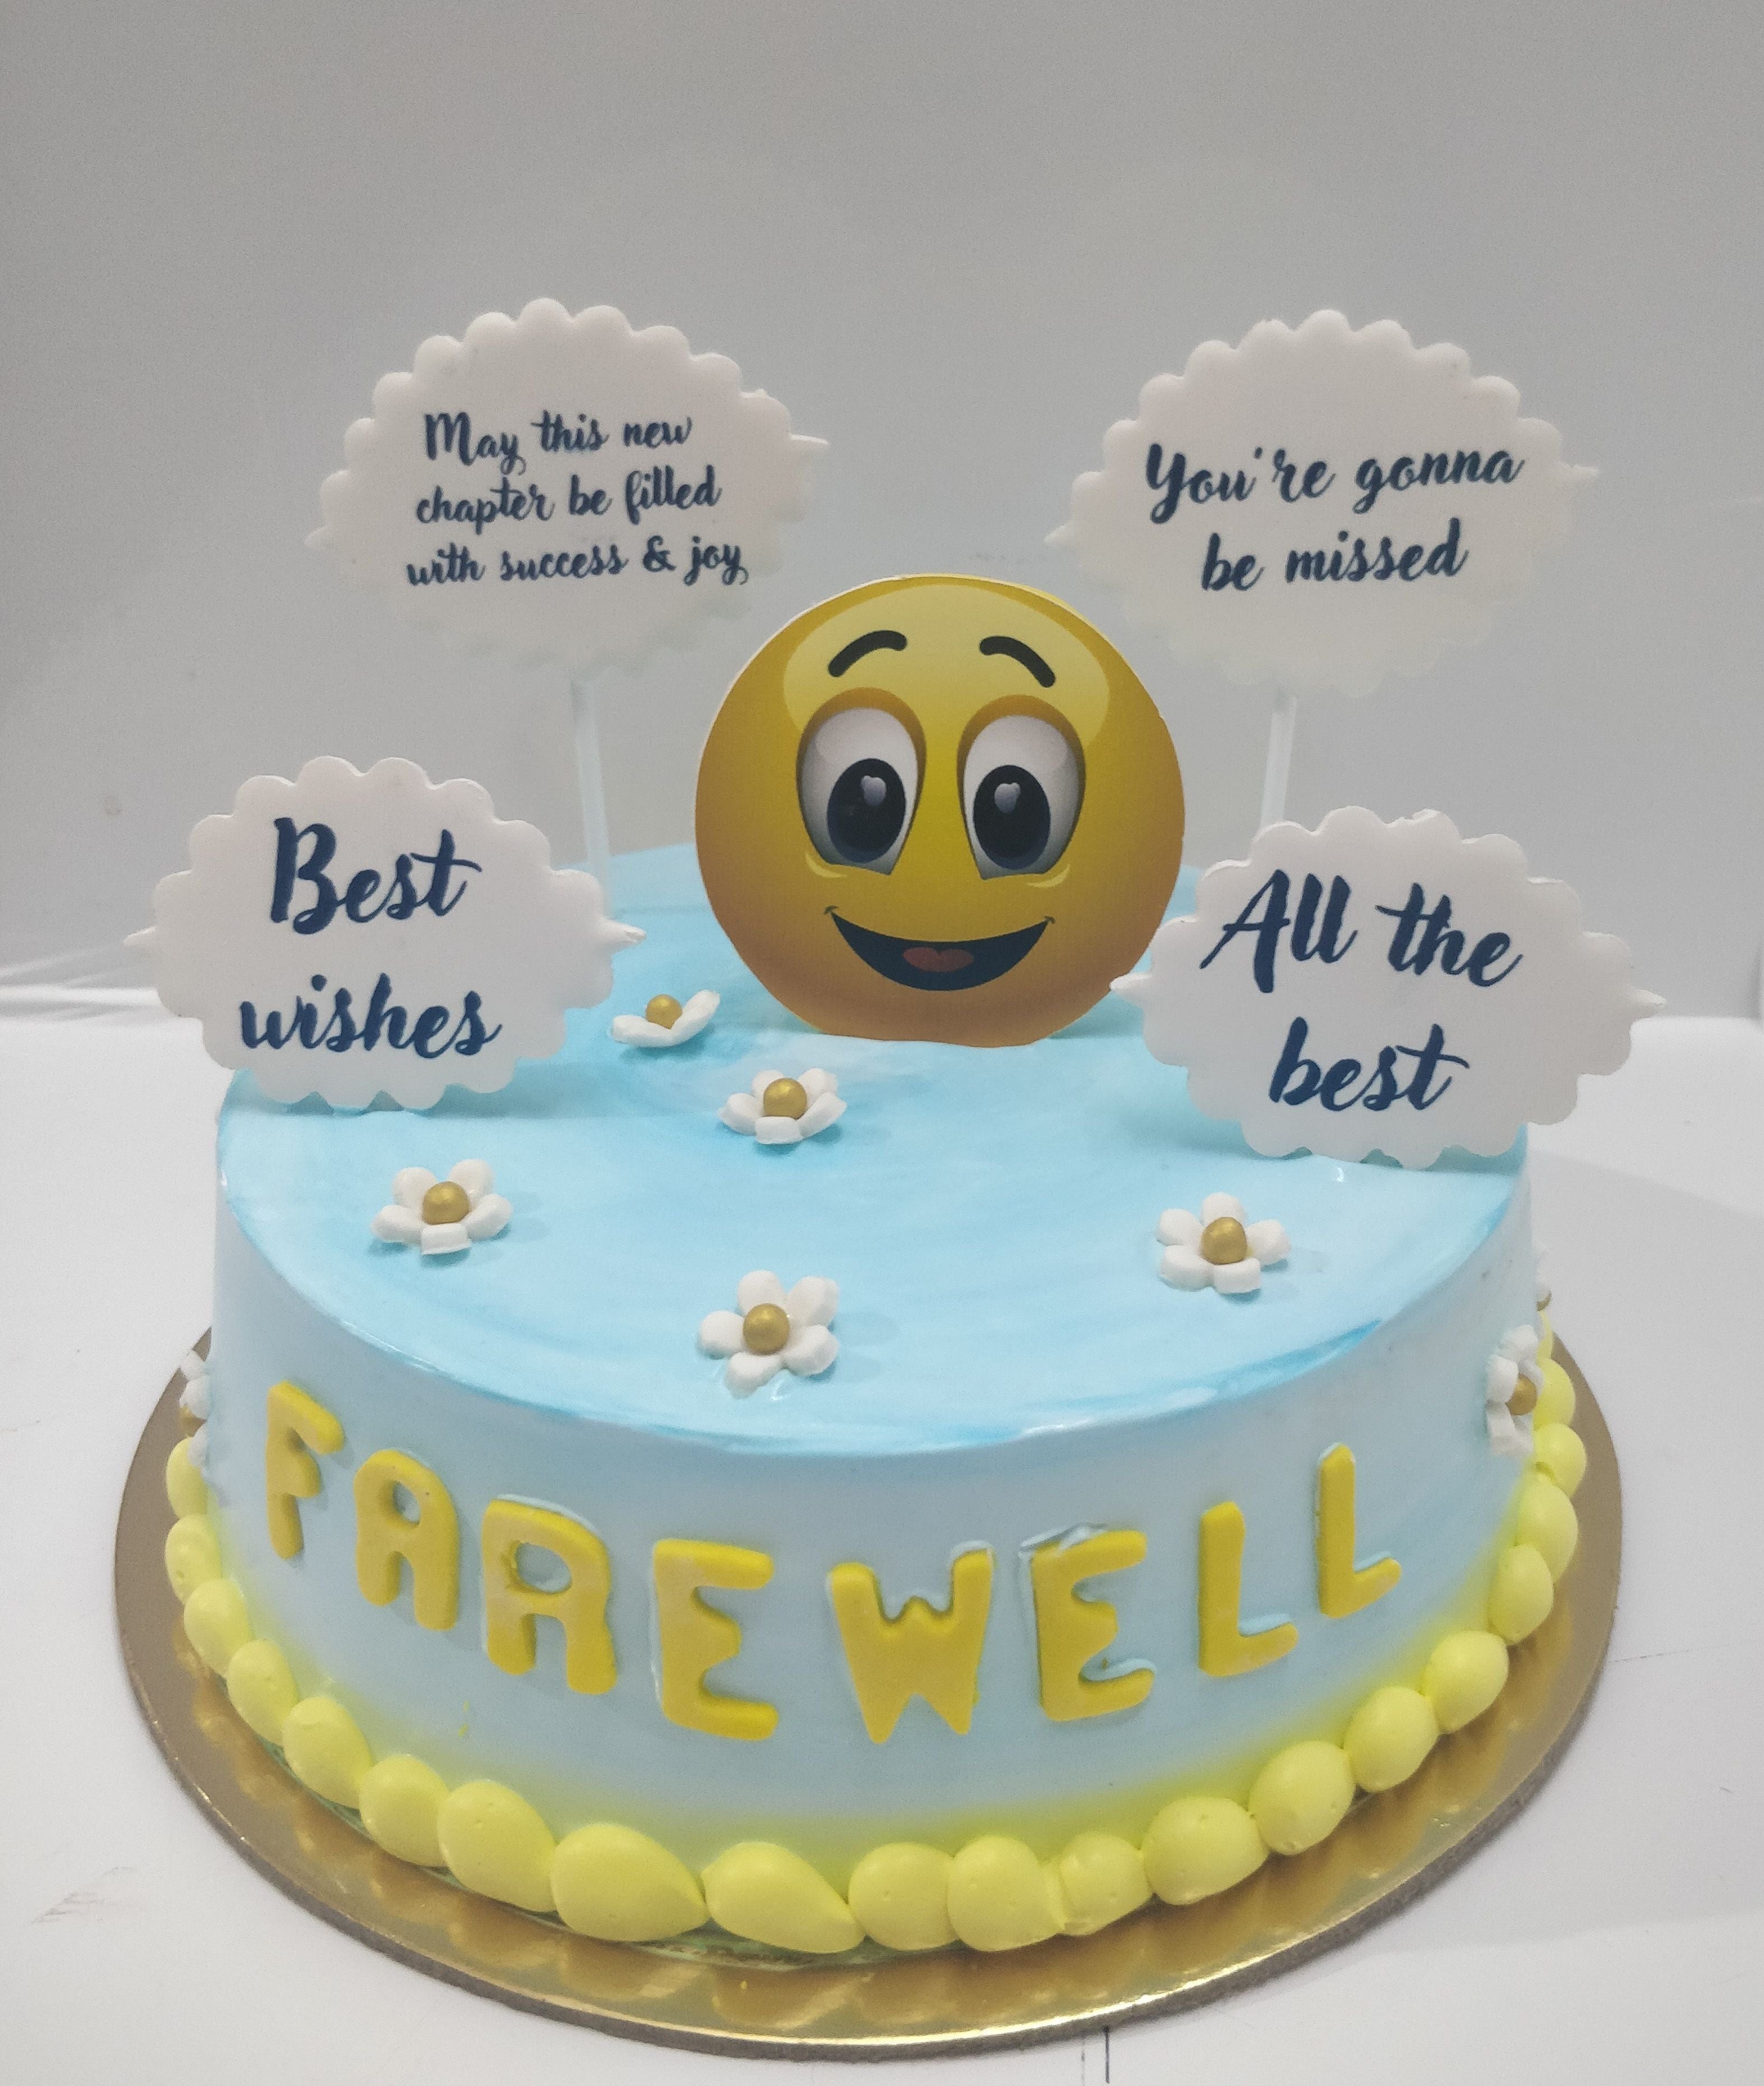 Farewell cake made for a chef to... - BakedGoodness by Manvi | Facebook